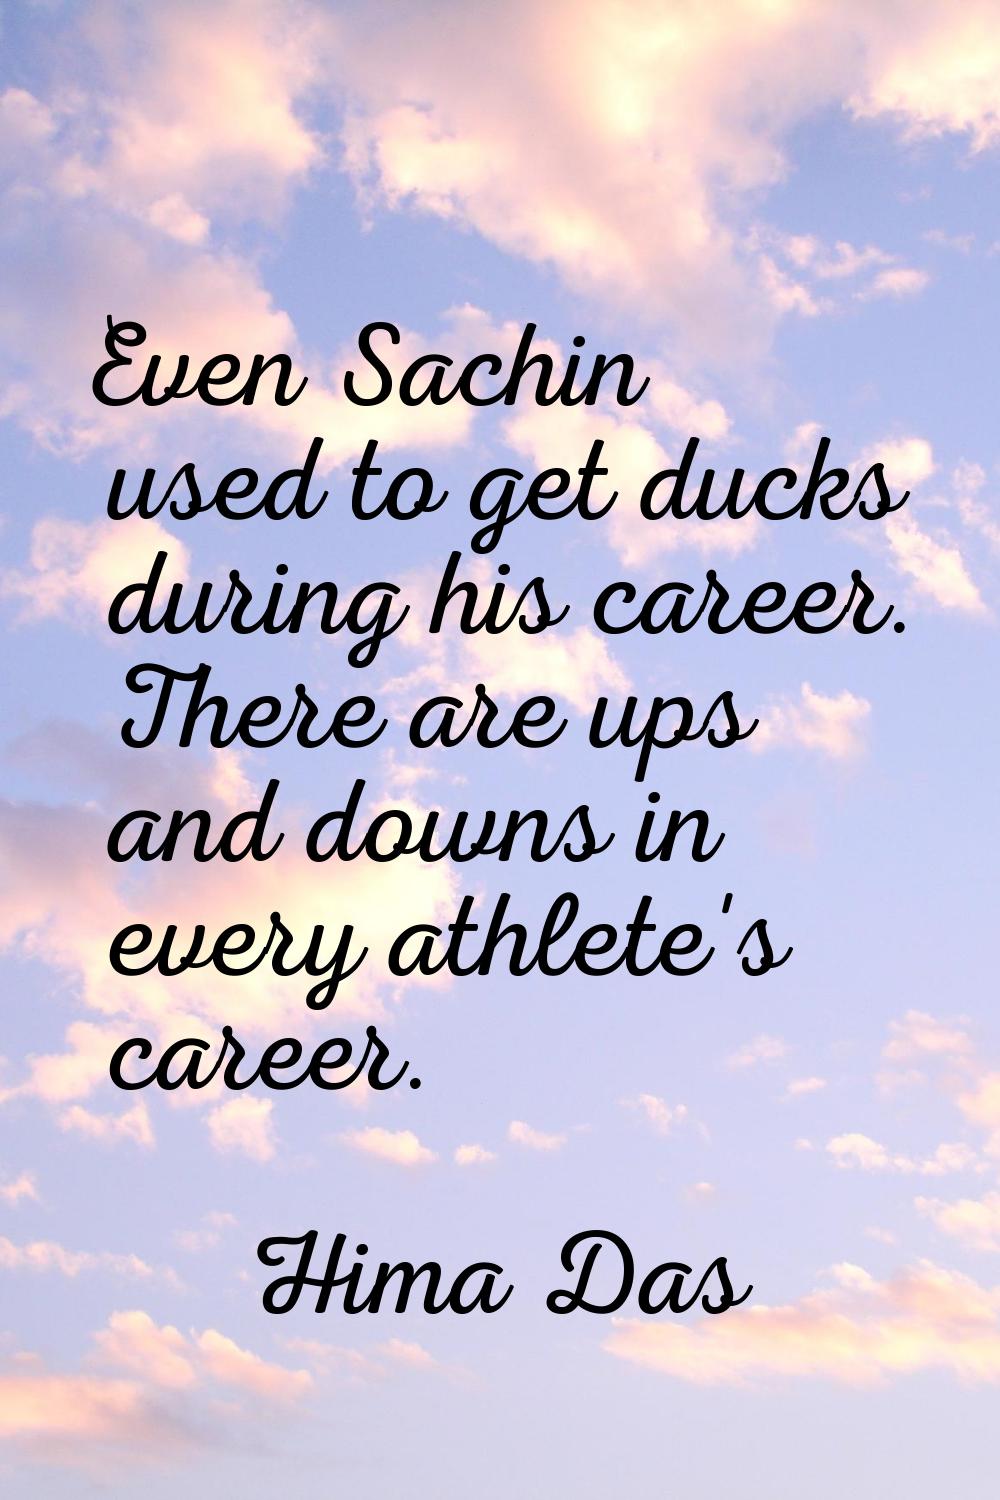 Even Sachin used to get ducks during his career. There are ups and downs in every athlete's career.